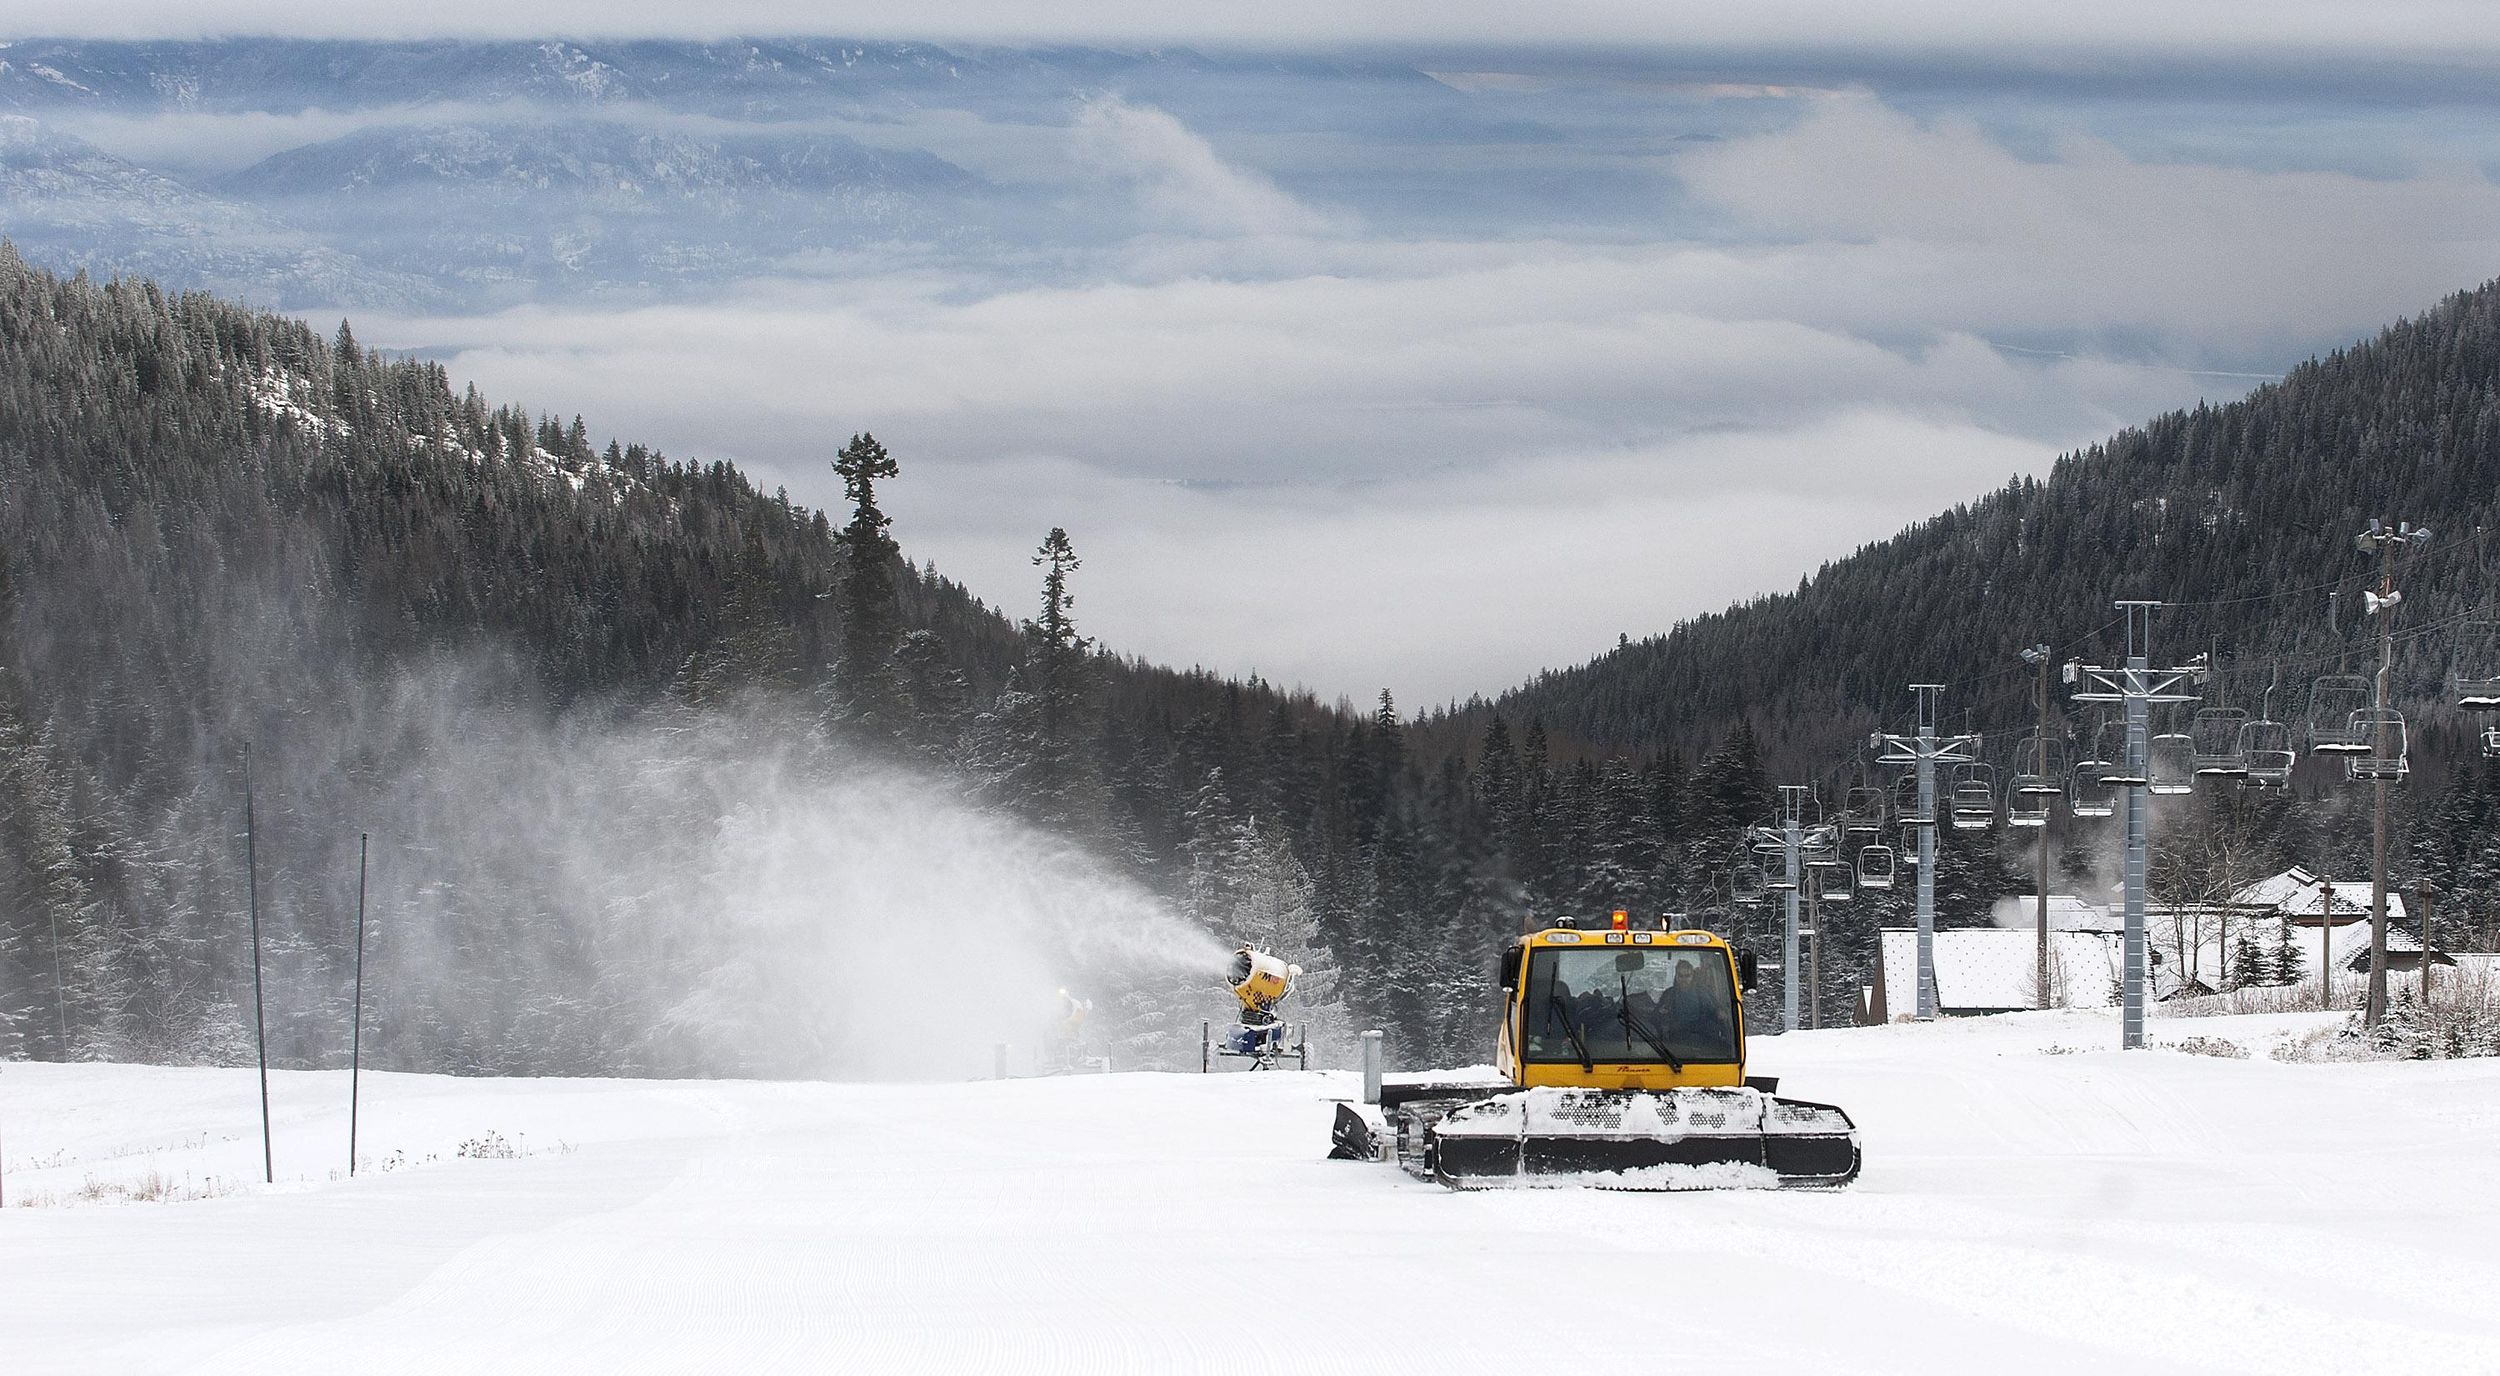 snowmaking: a subreddit for snowmaking